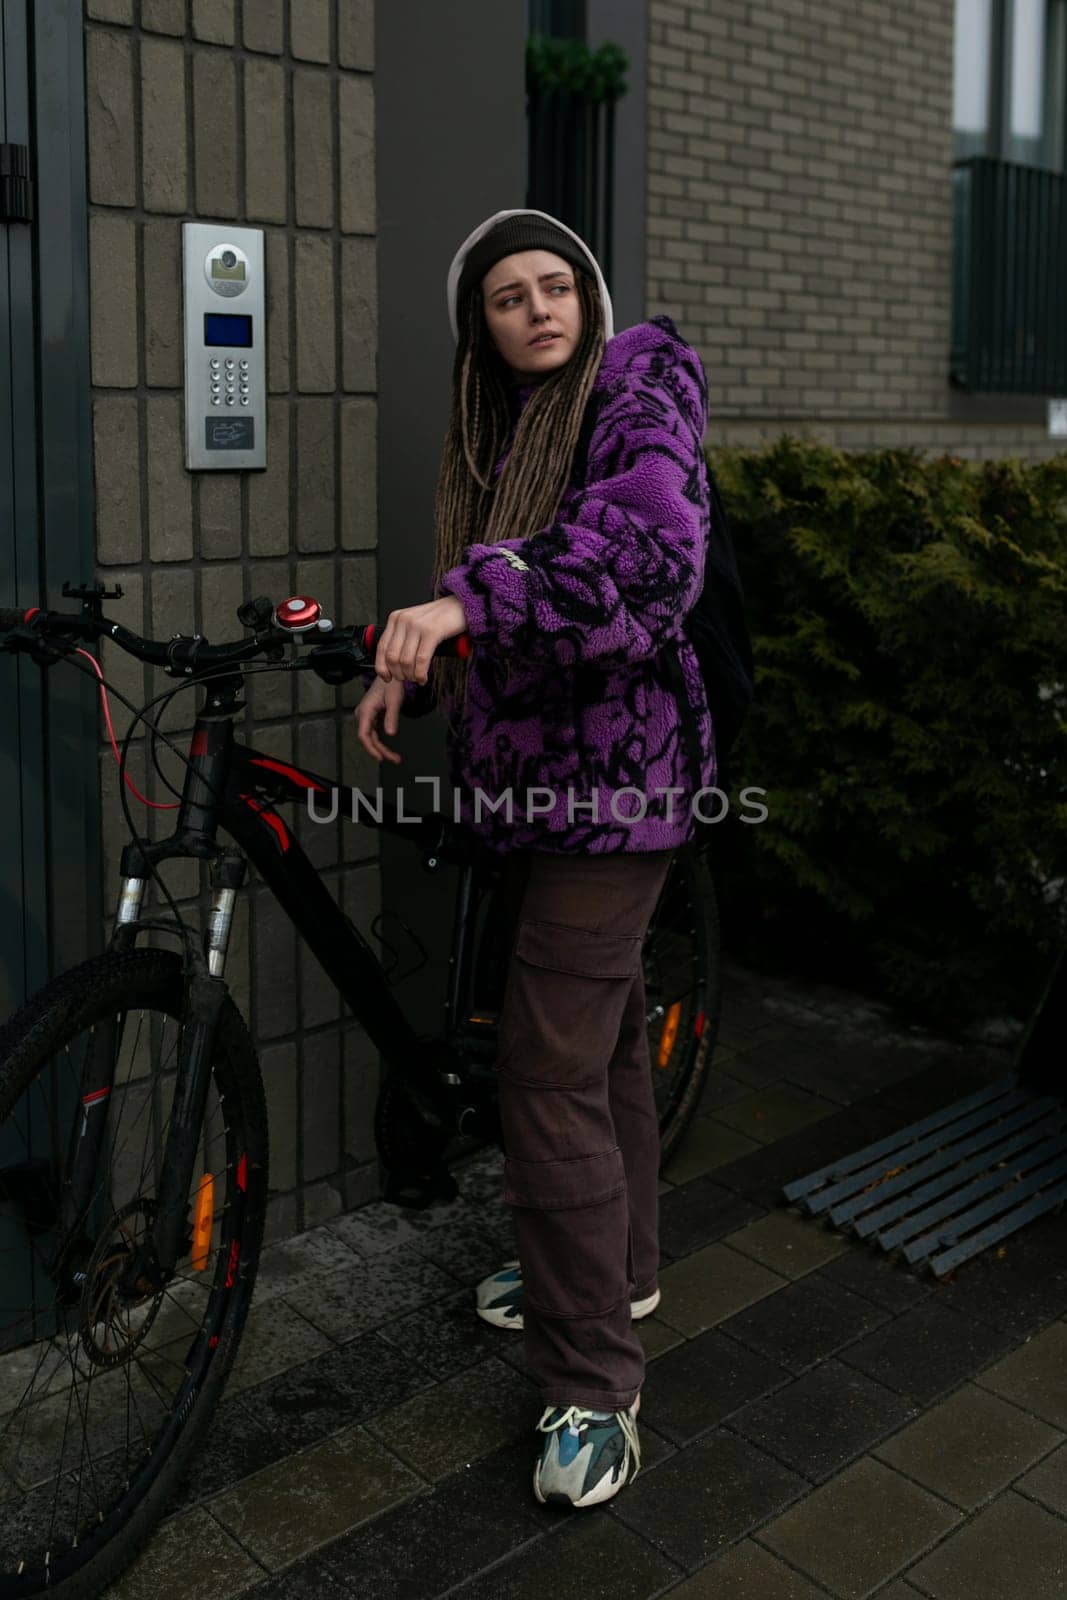 Nice young woman standing near the house with a bicycle.